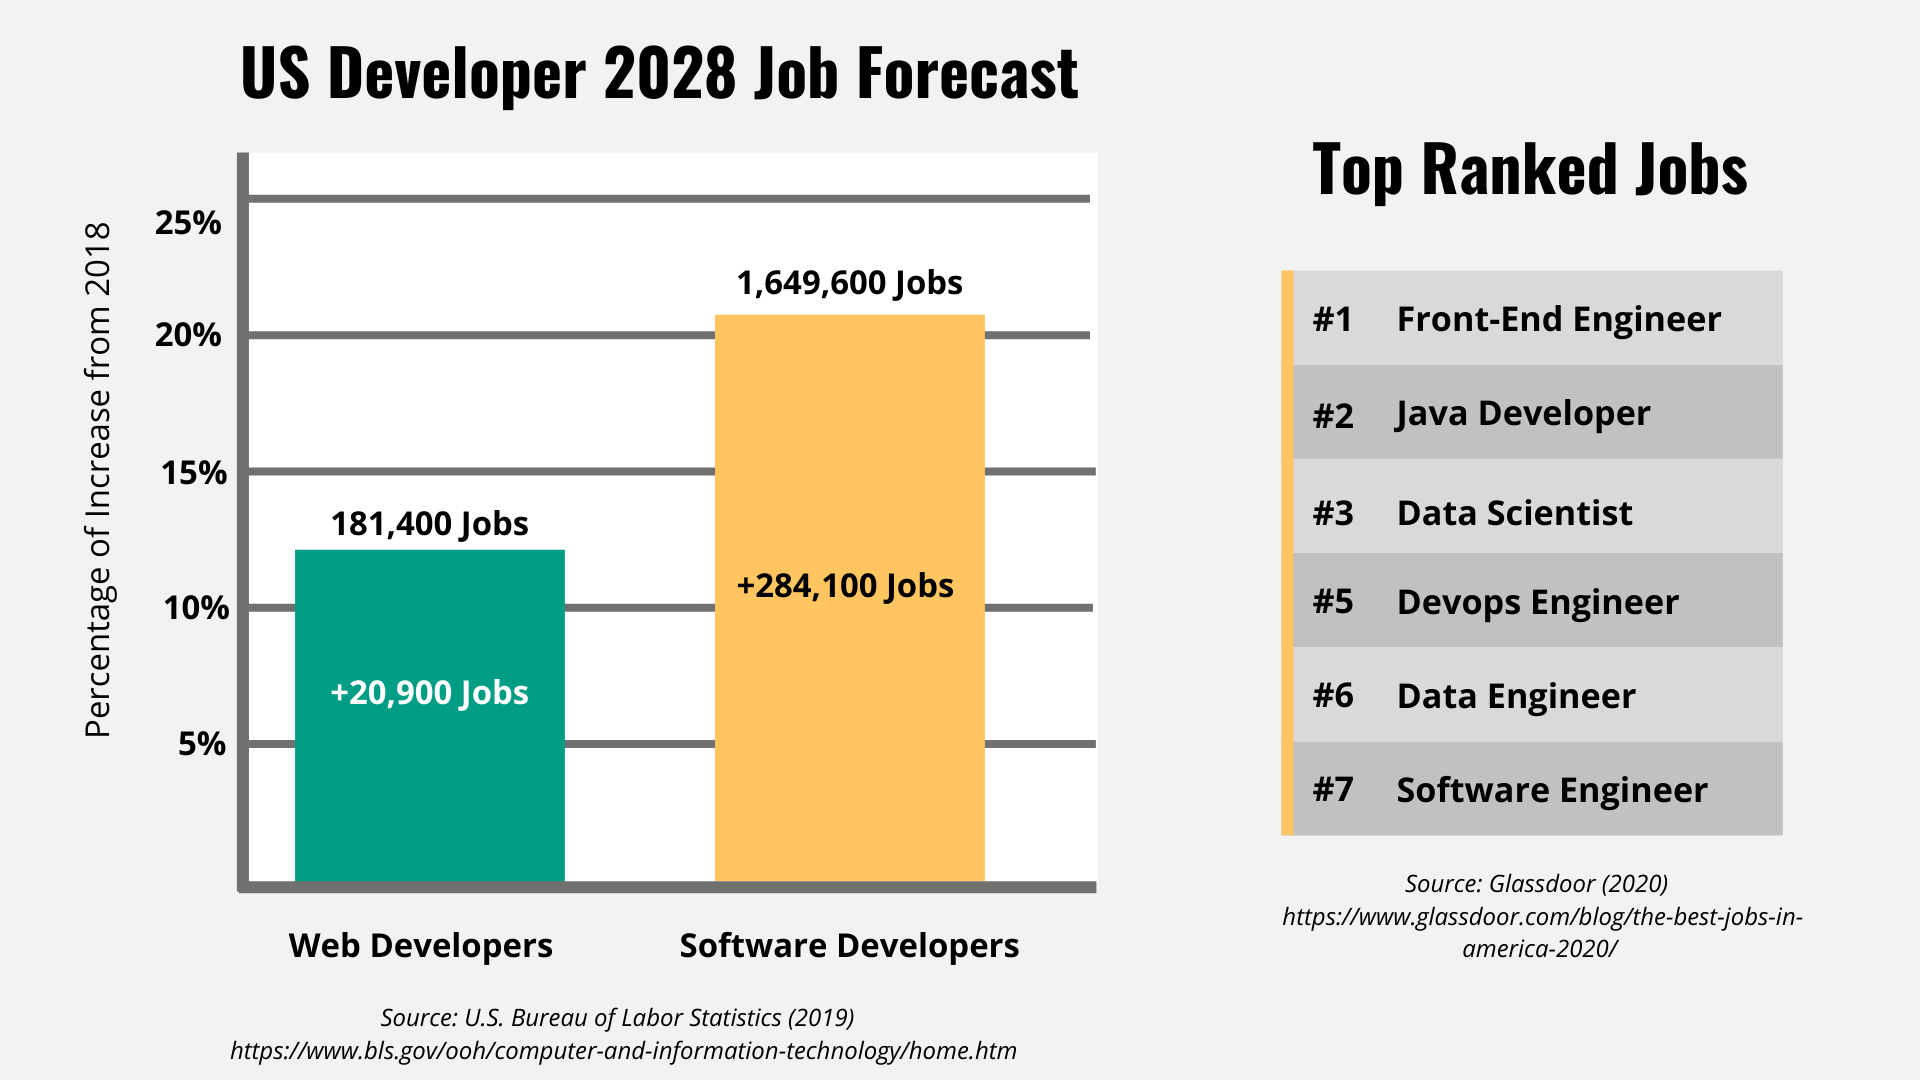 Develop Job forecast and top ranked jobs